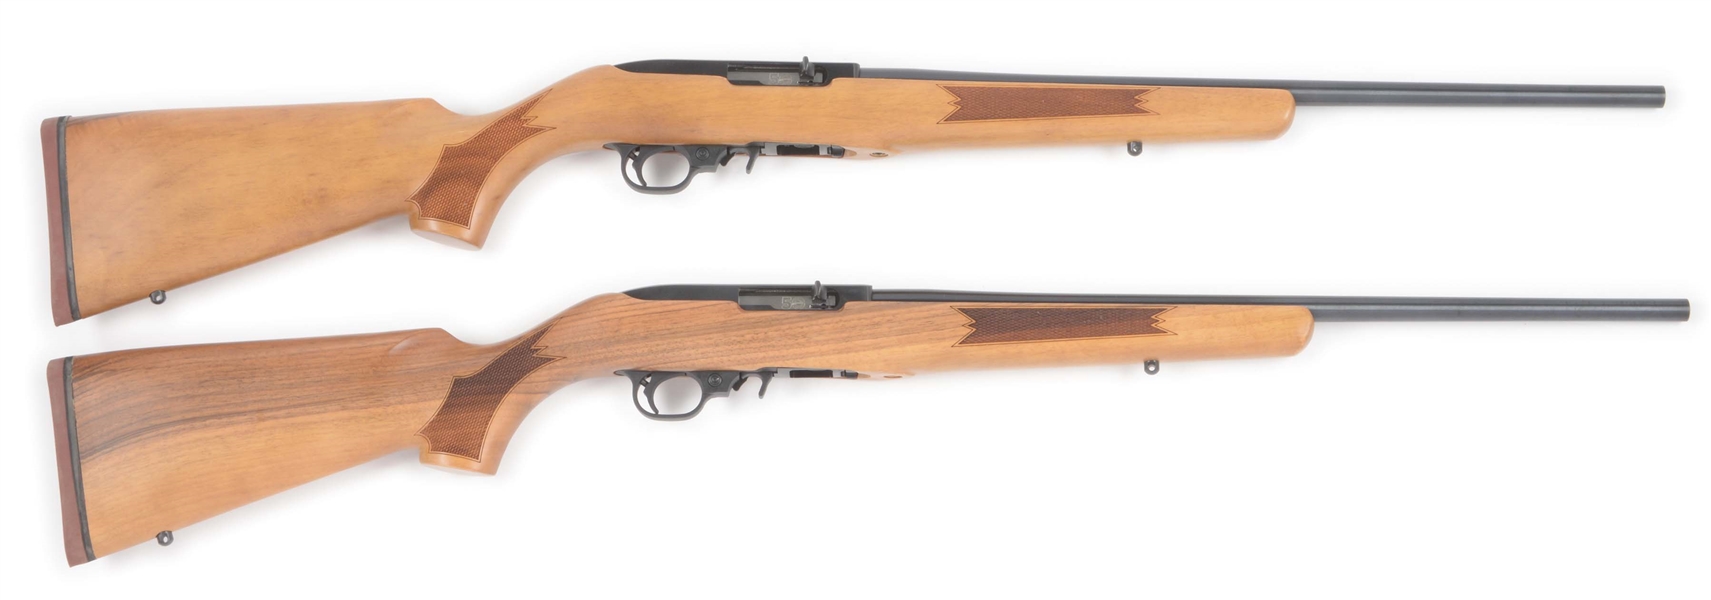 (M) LOT OF TWO: TWO RUGER 10/22 50TH ANNIVERSARY SEMI AUTOMATIC RIFLES.